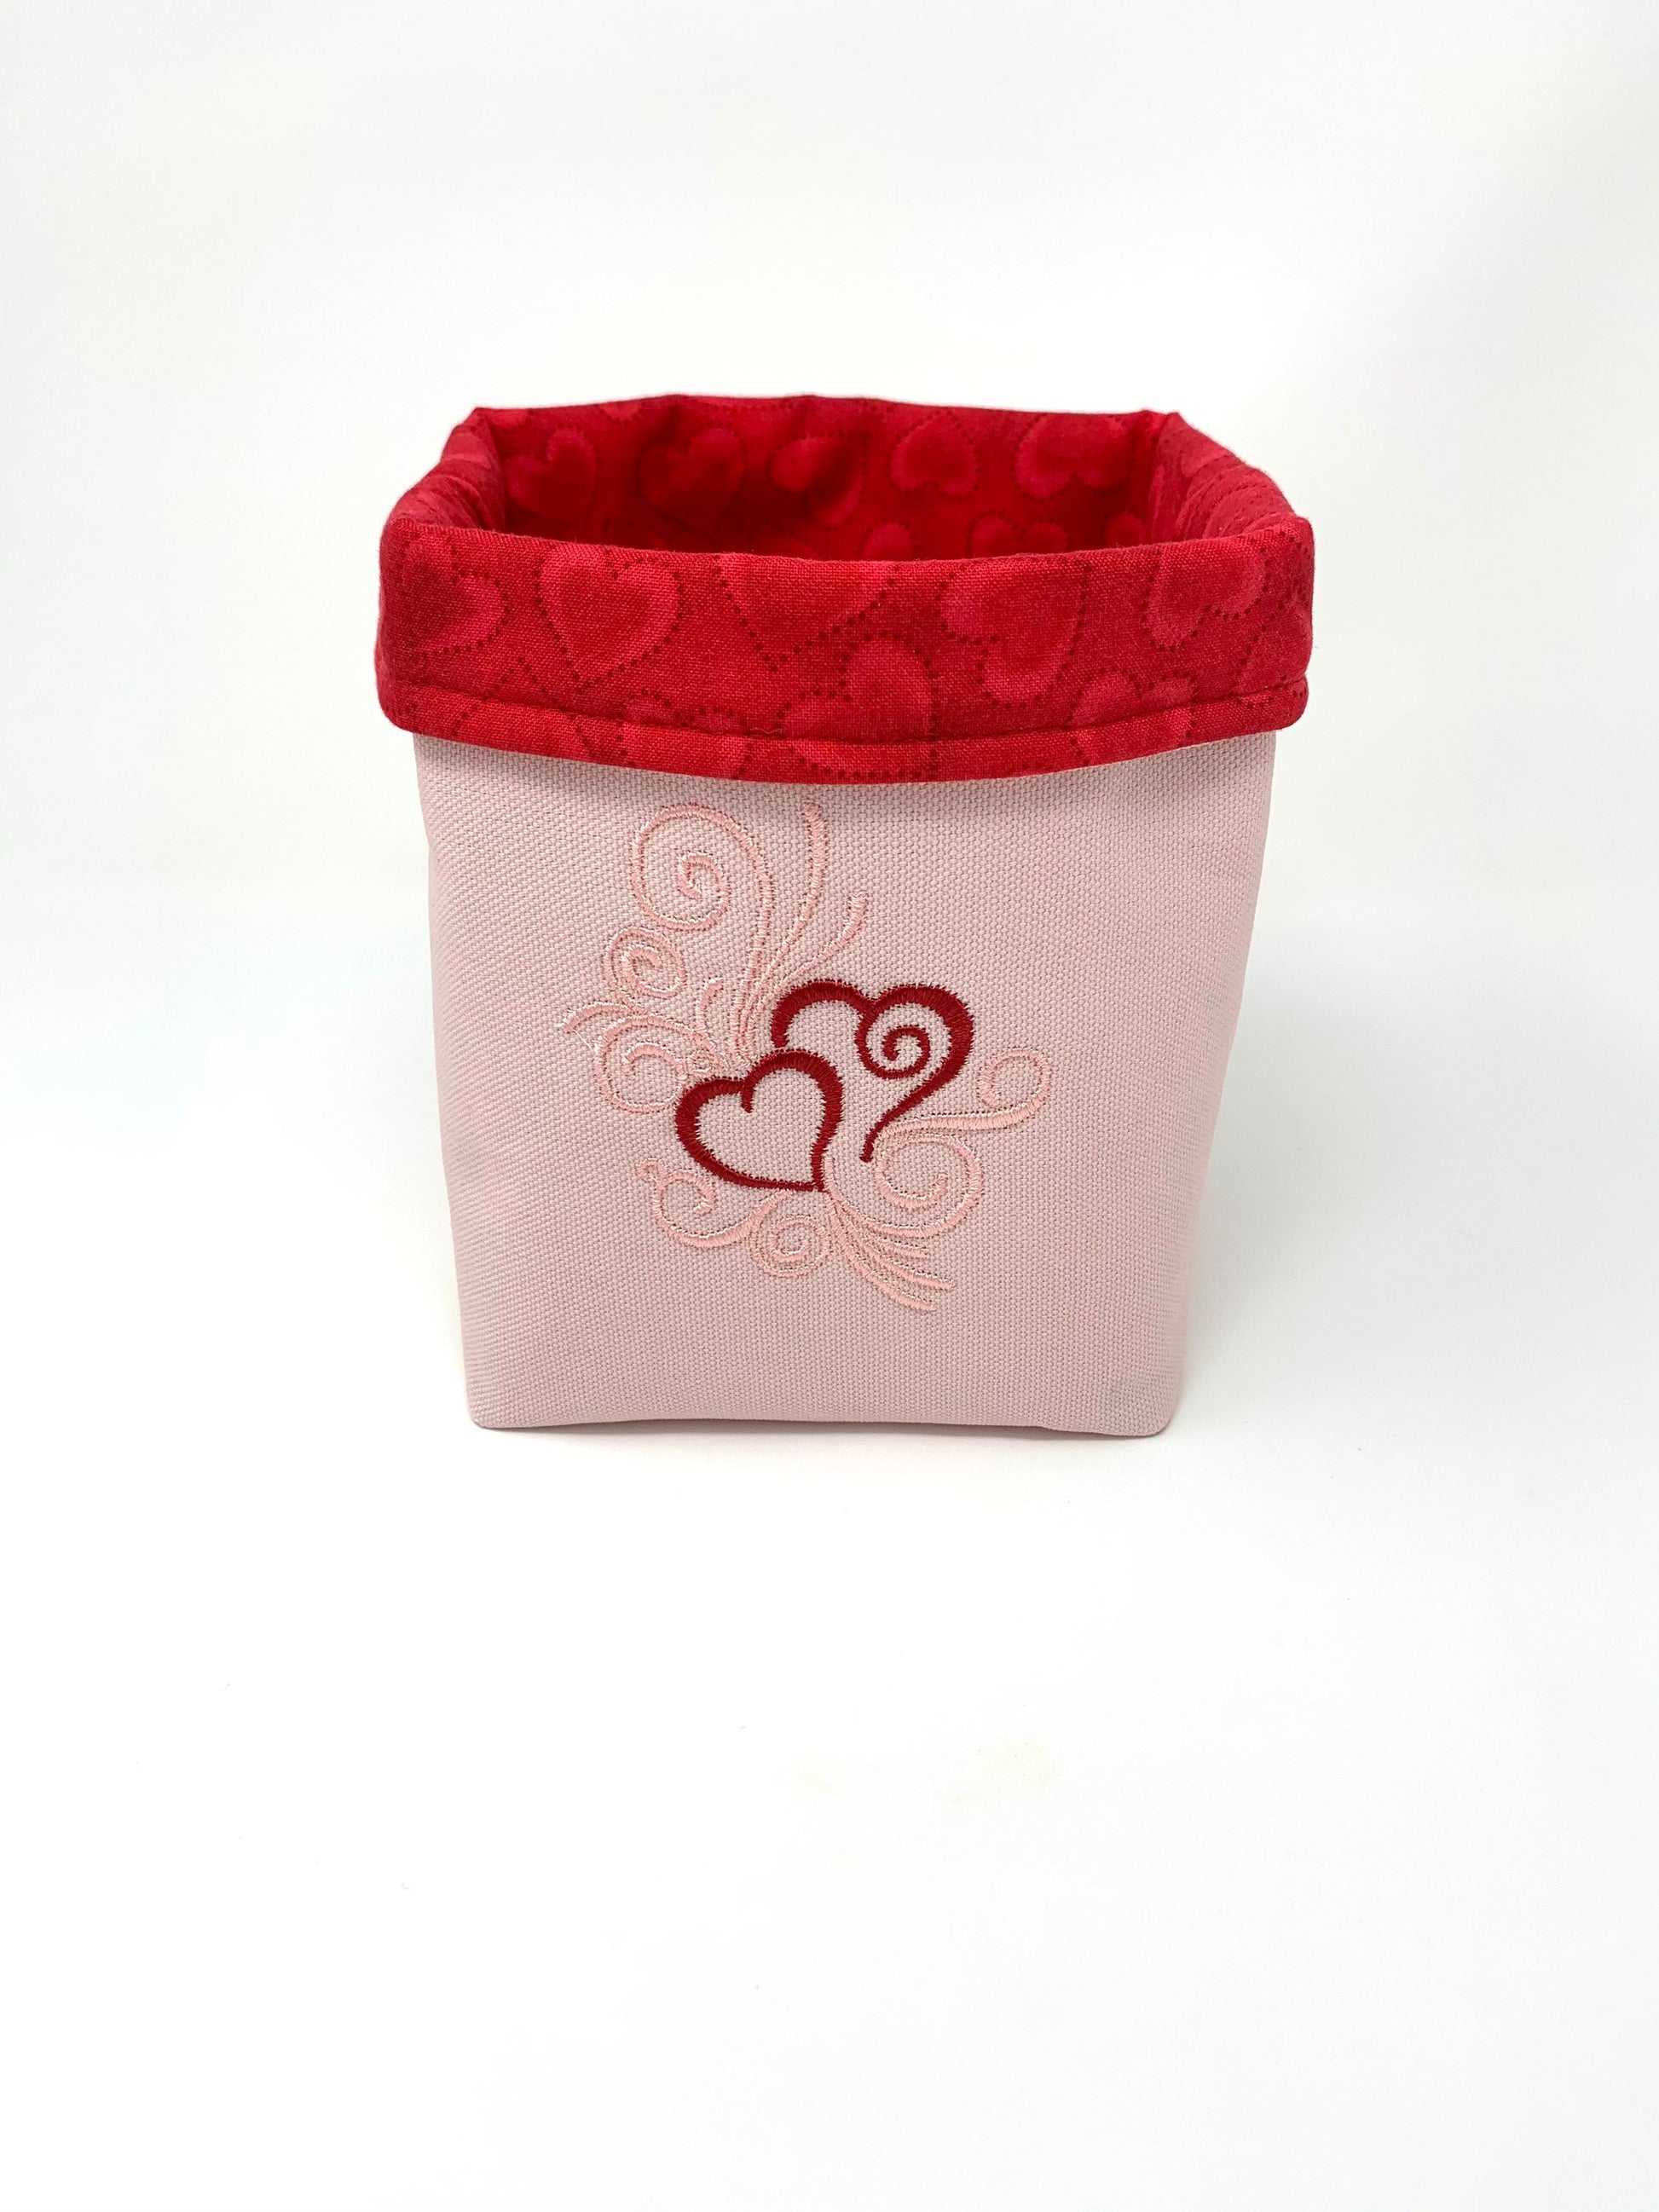 Fabric Bag, Basket, Reusable, Tissue Box Holder, Hearts, Valentines Day, Red, Pink, Handmade